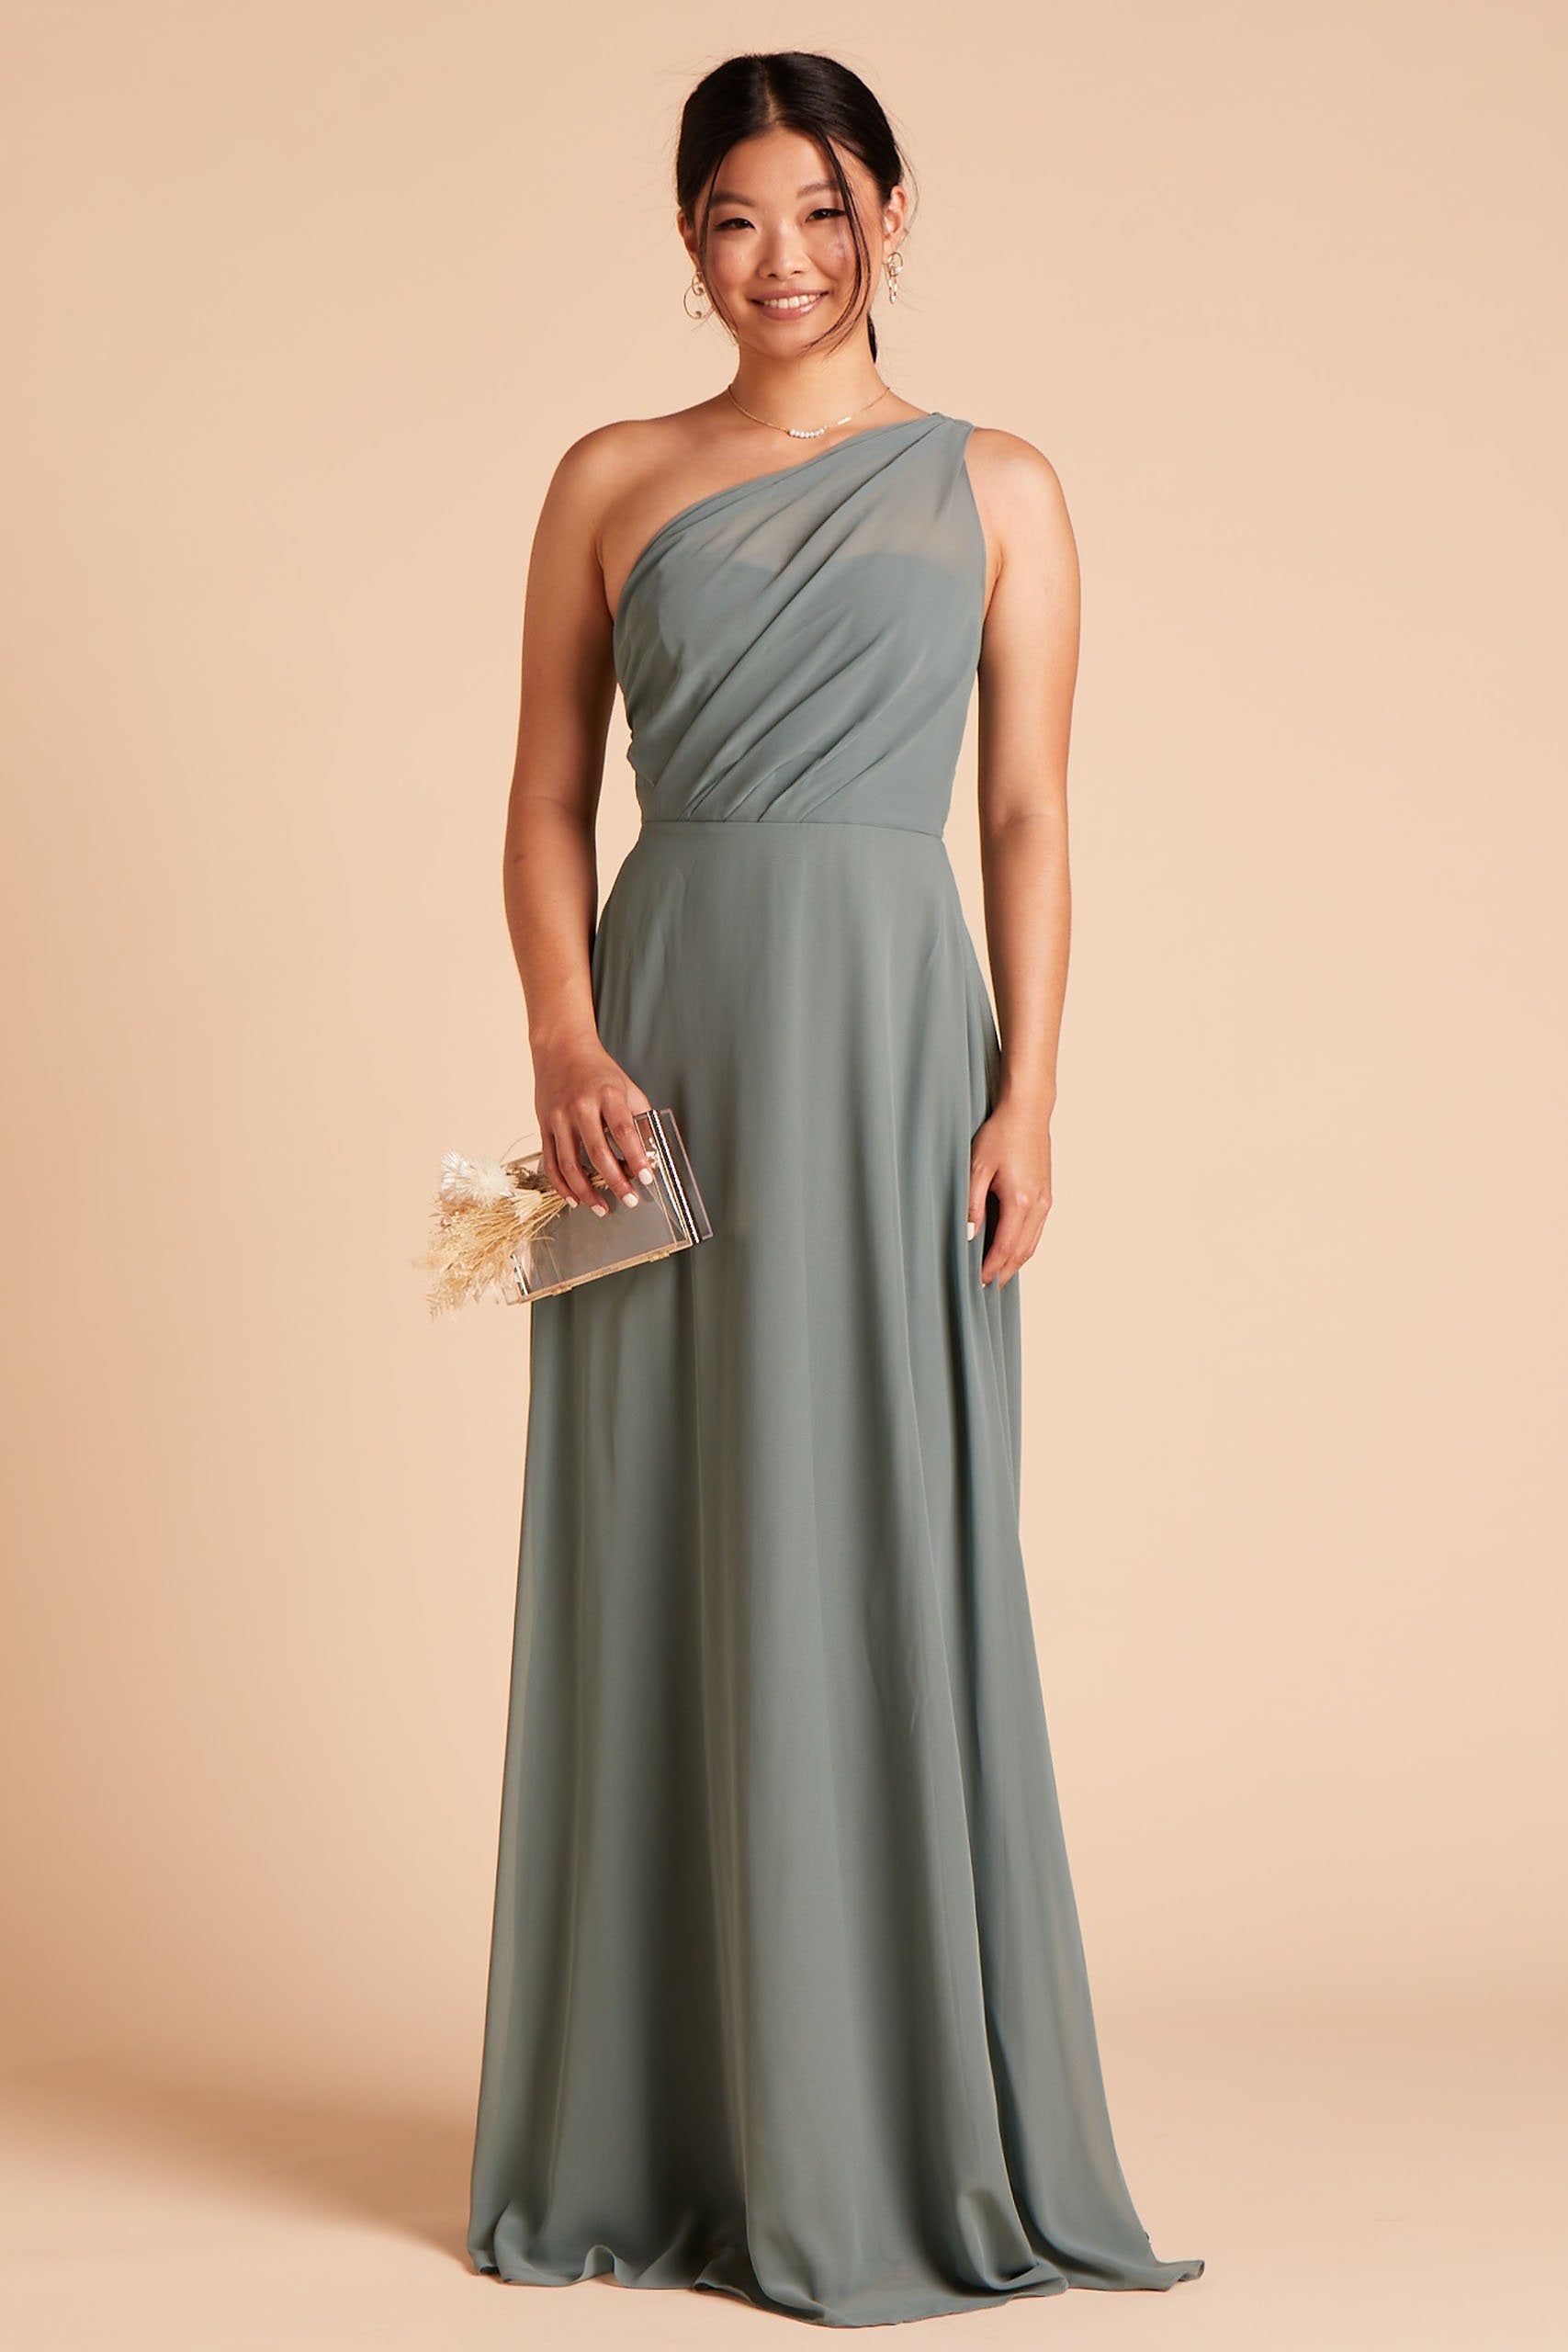 Front view of the Kira Dress in sea glass chiffon without the optional slit shows a slender model with a medium skin tone wearing an asymmetrical one-shoulder, full-length dress. Soft pleating gathers at the left shoulder of the bodice with a smooth fit at the waist as the dress skirt with a slight A-line silhouette flows to the floor.